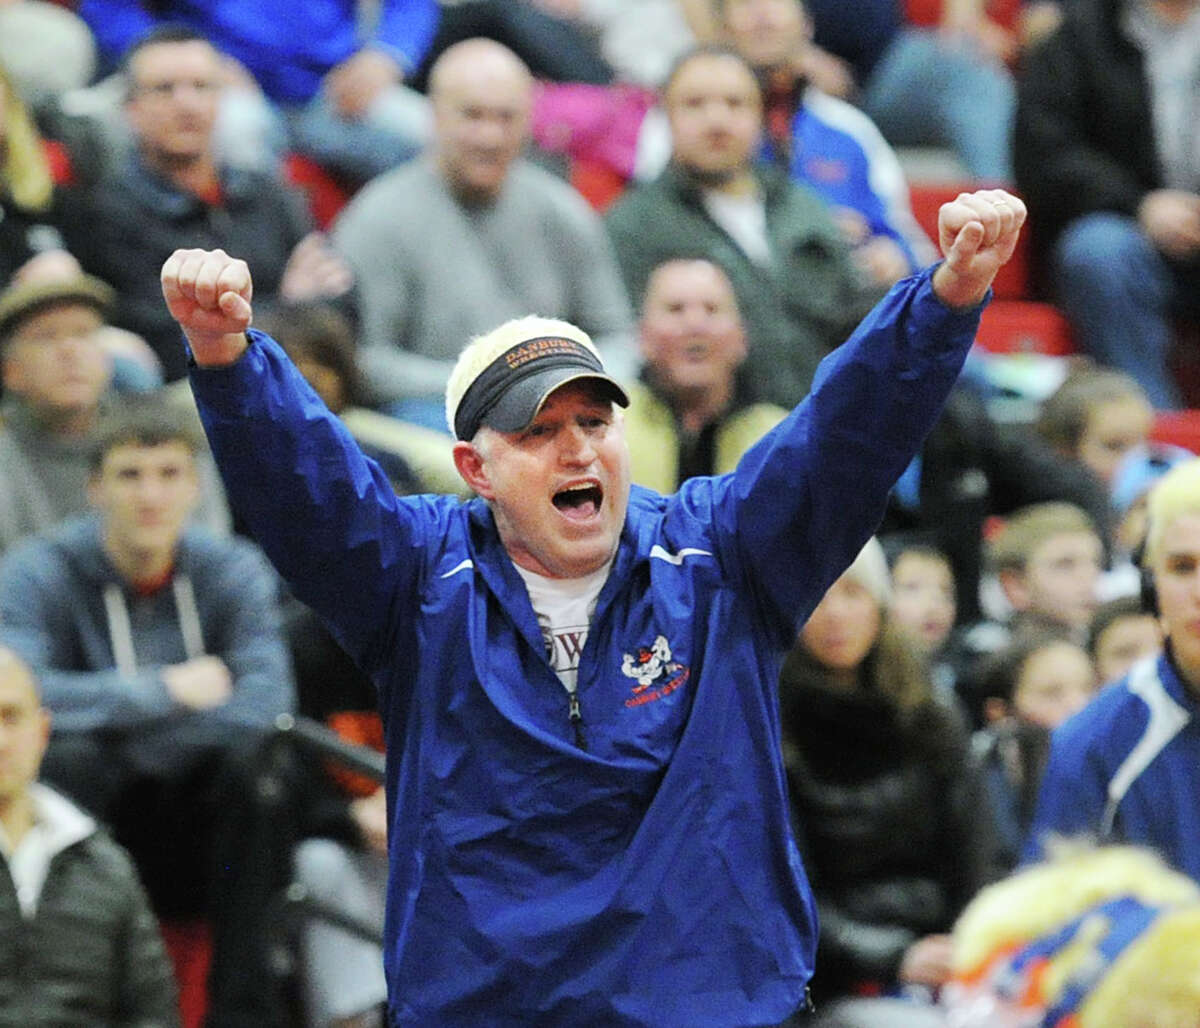 Danbury wrestling coach Ricky Shook reacts during the FCIAC wrestling championships at New Canaan High School, Conn., Saturday, Feb. 13, 2016.